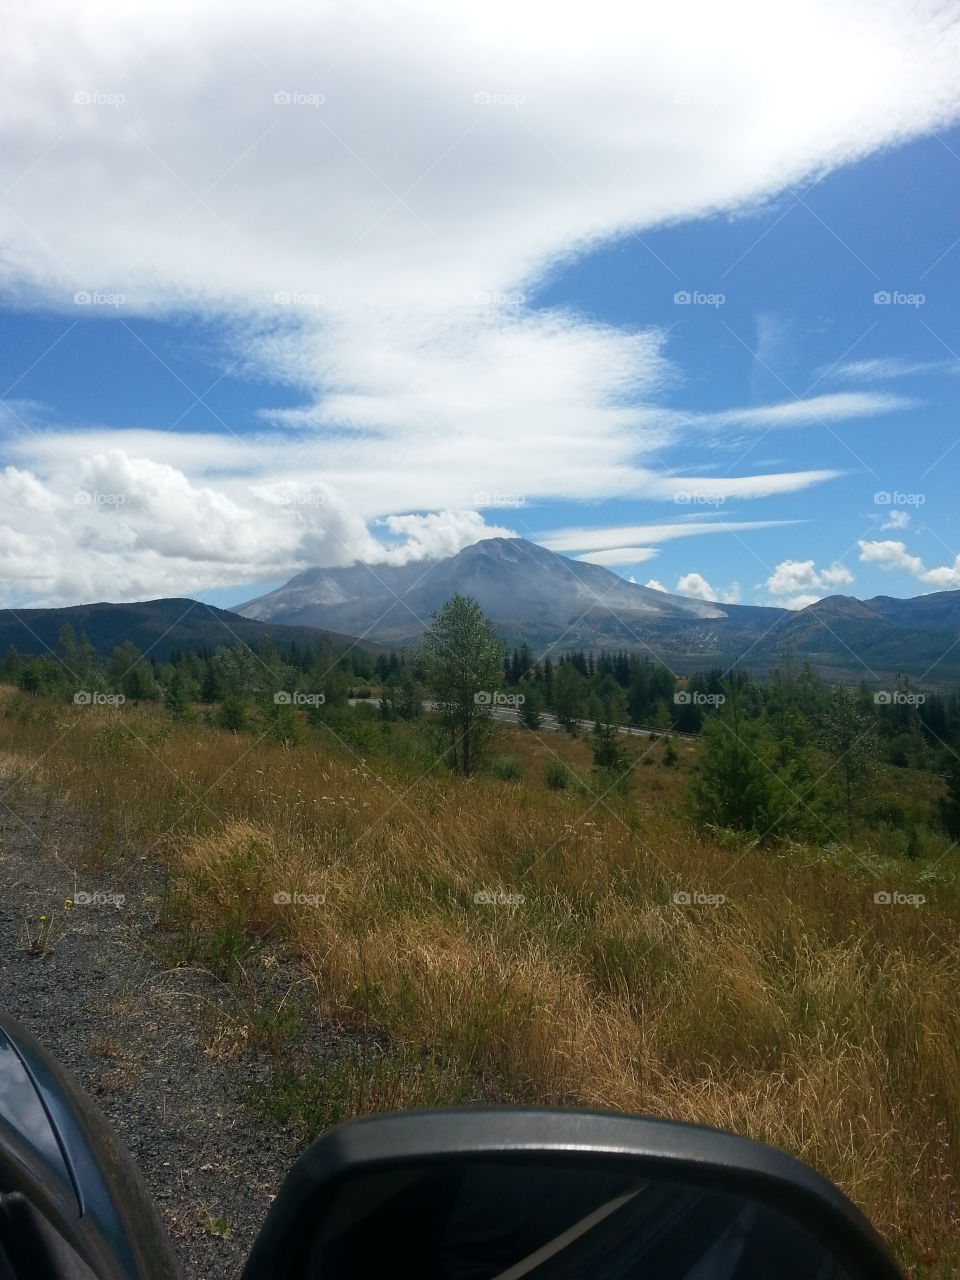 Mt. St. Helens. Went on a day trip to Mt. St. Helens and snapped this photo.